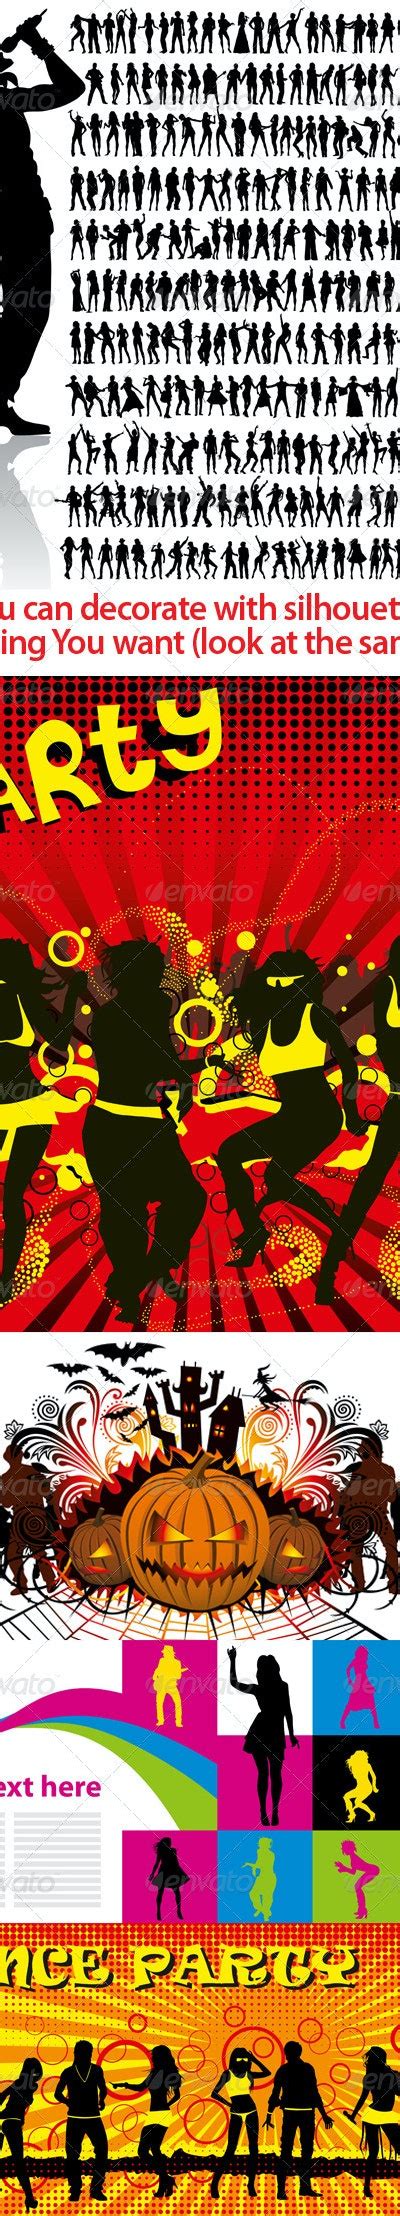 Dancing And Singing Peoples Silhouettes Big Set By Leedsn Graphicriver